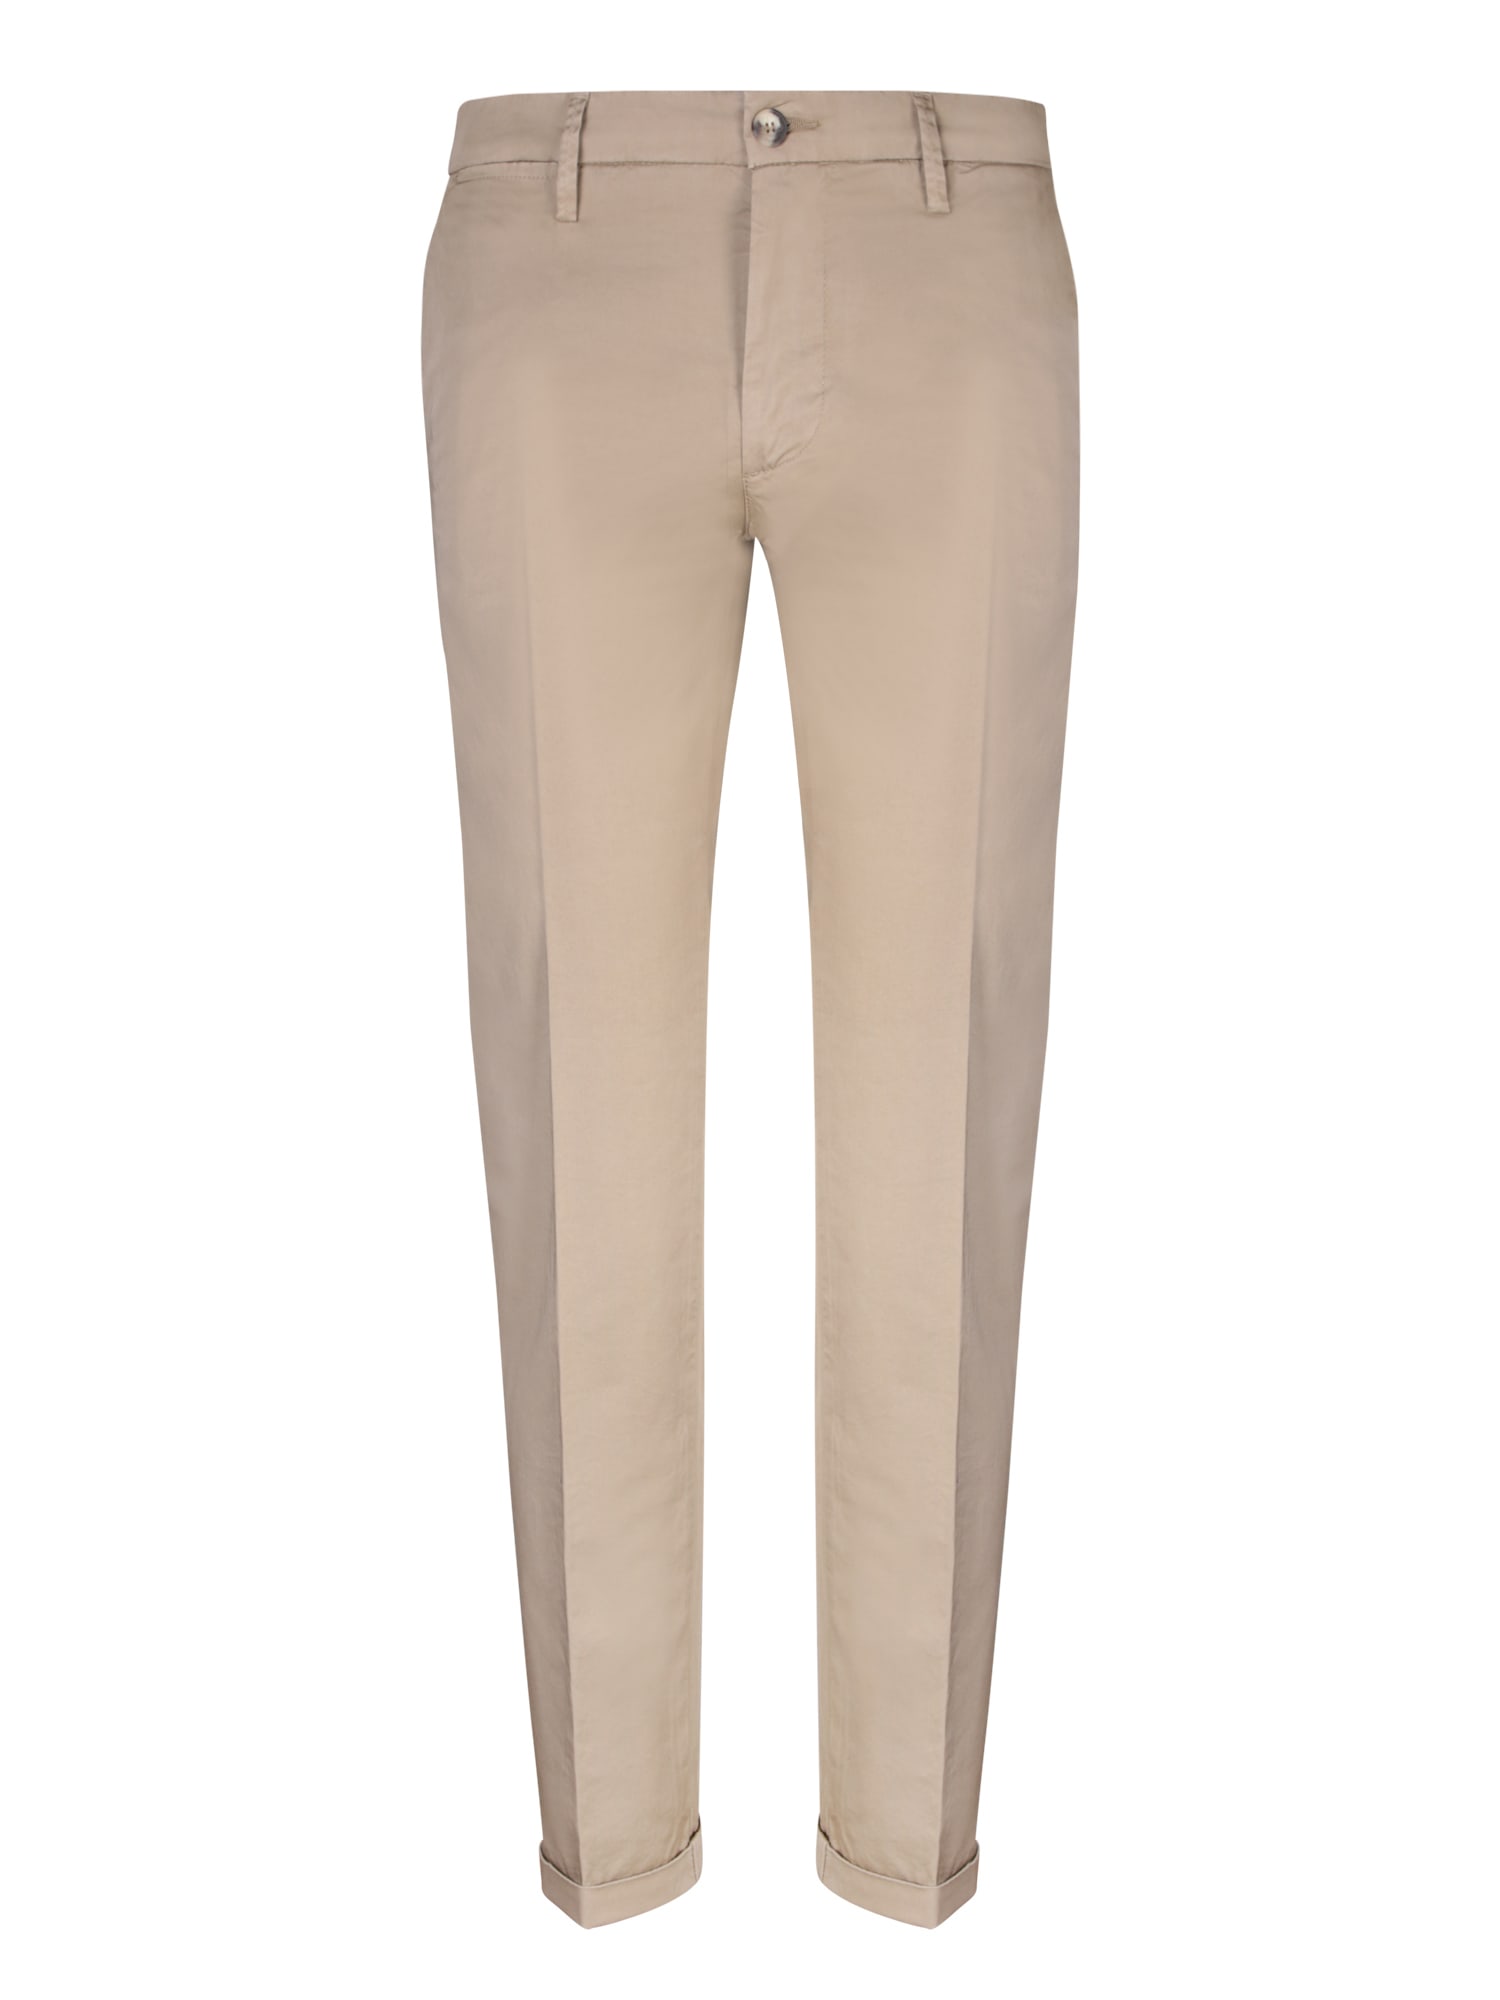 Re-hash Mucha Cotton Brown Trousers